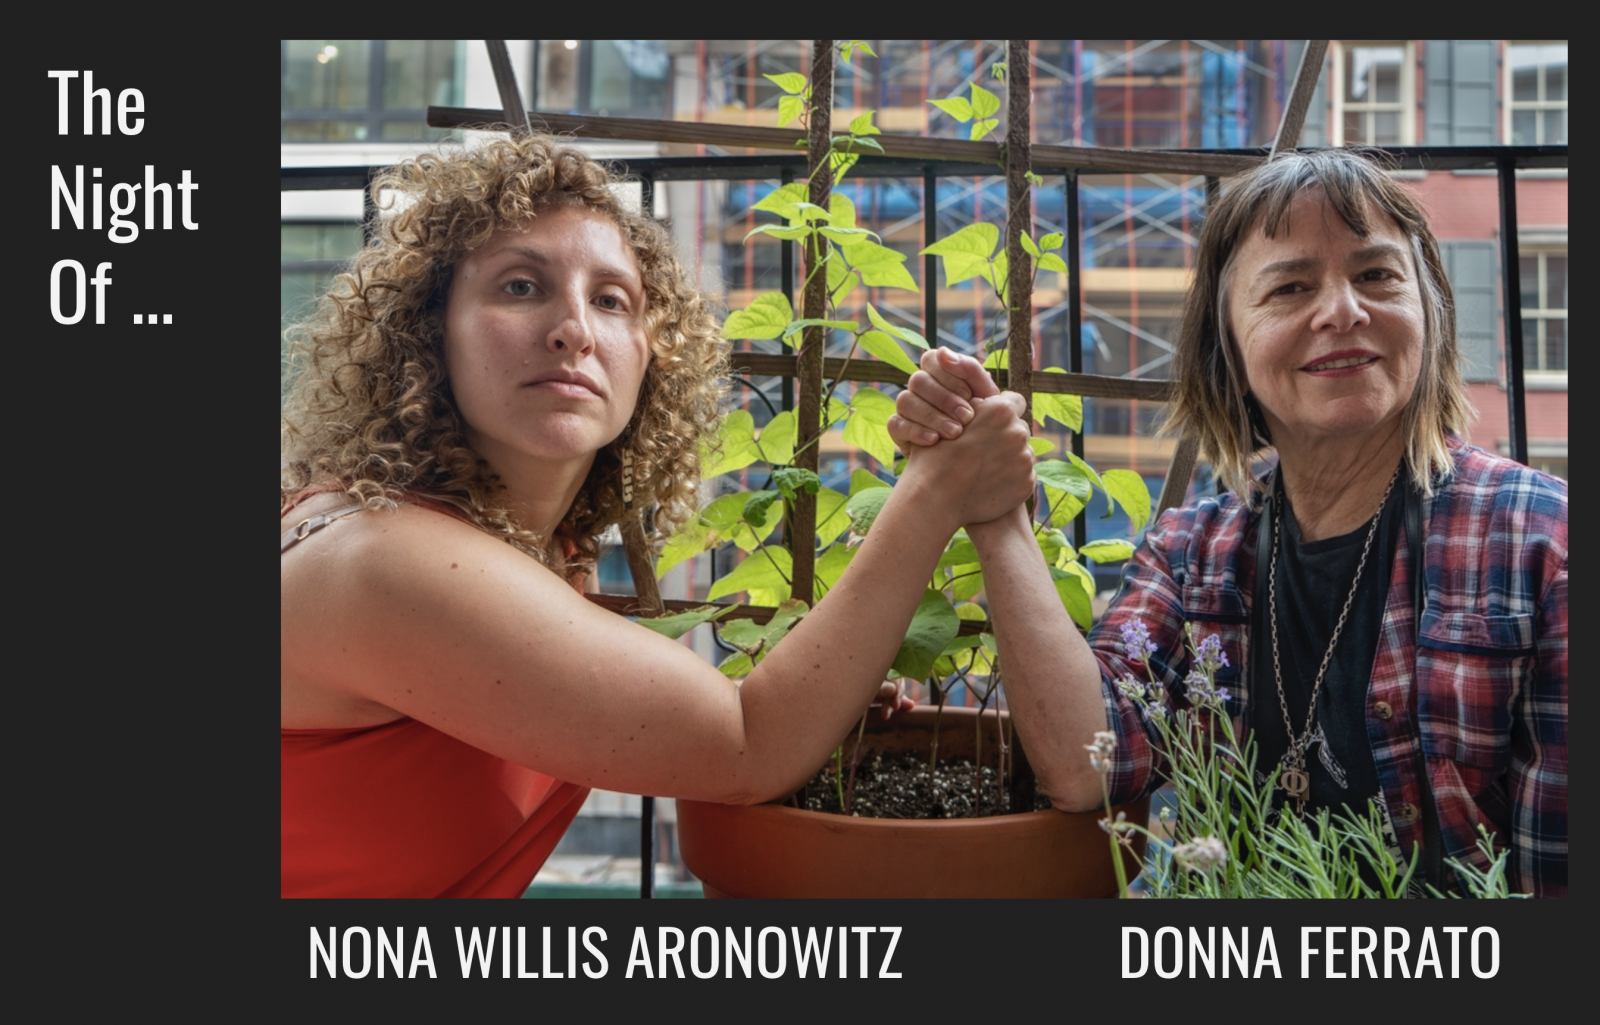 From Behind Closed Doors to #MeToo: A Conversation with Donna Ferrato and Nona Willis Aronowitz